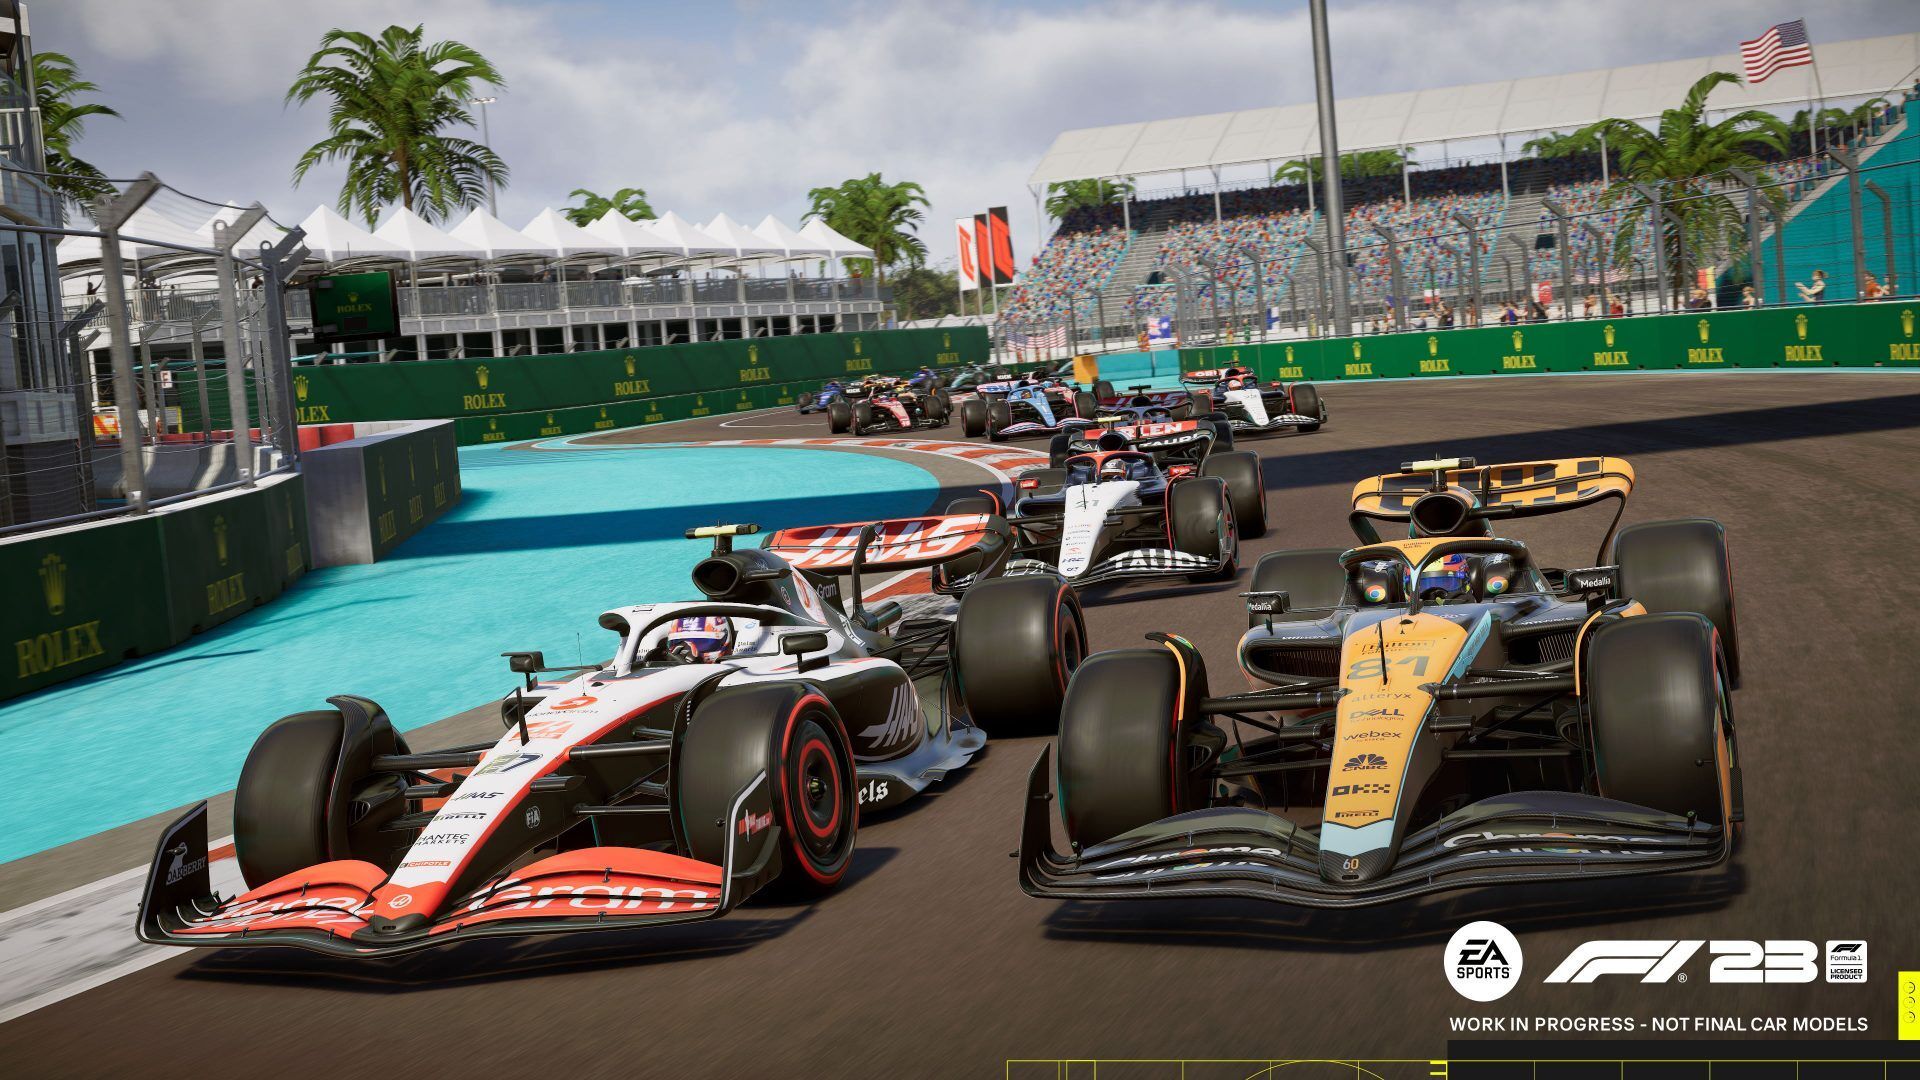 release Sports F1 details game 23 date EA as on is revealed